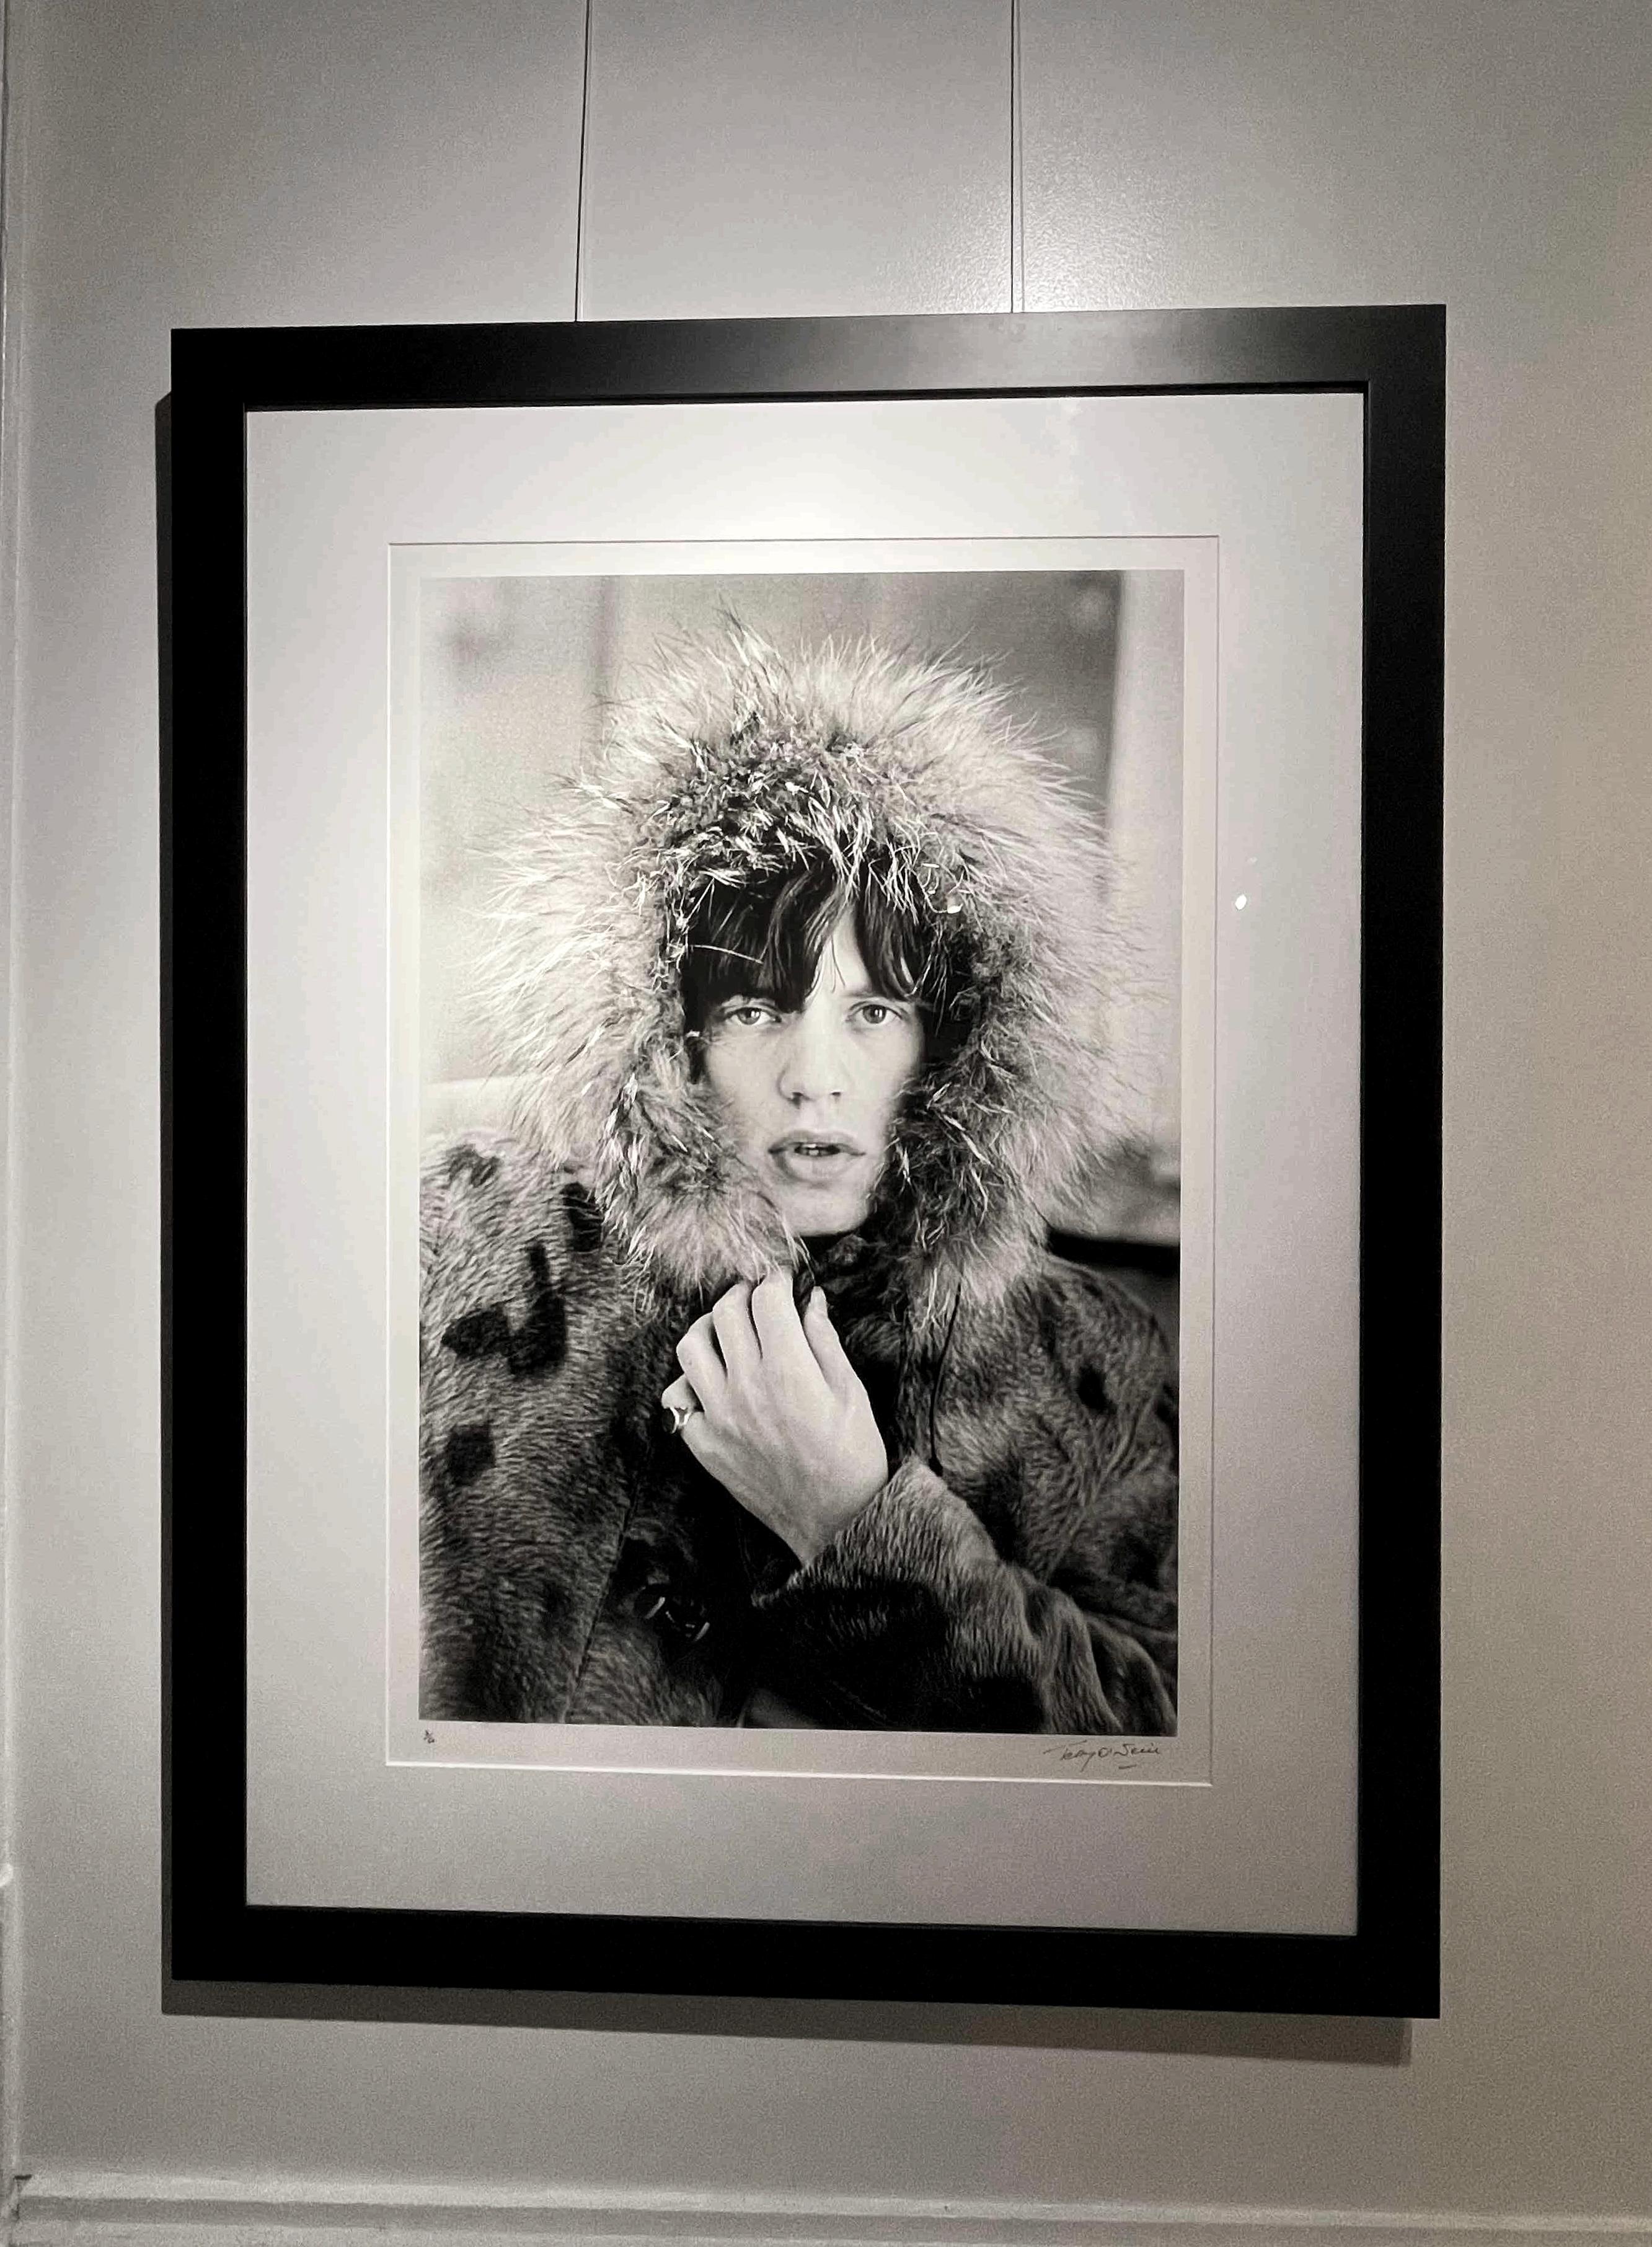 Mick Jagger Parka, 1964 Signed Limited Edition, Framed - Photograph by Terry O'Neill